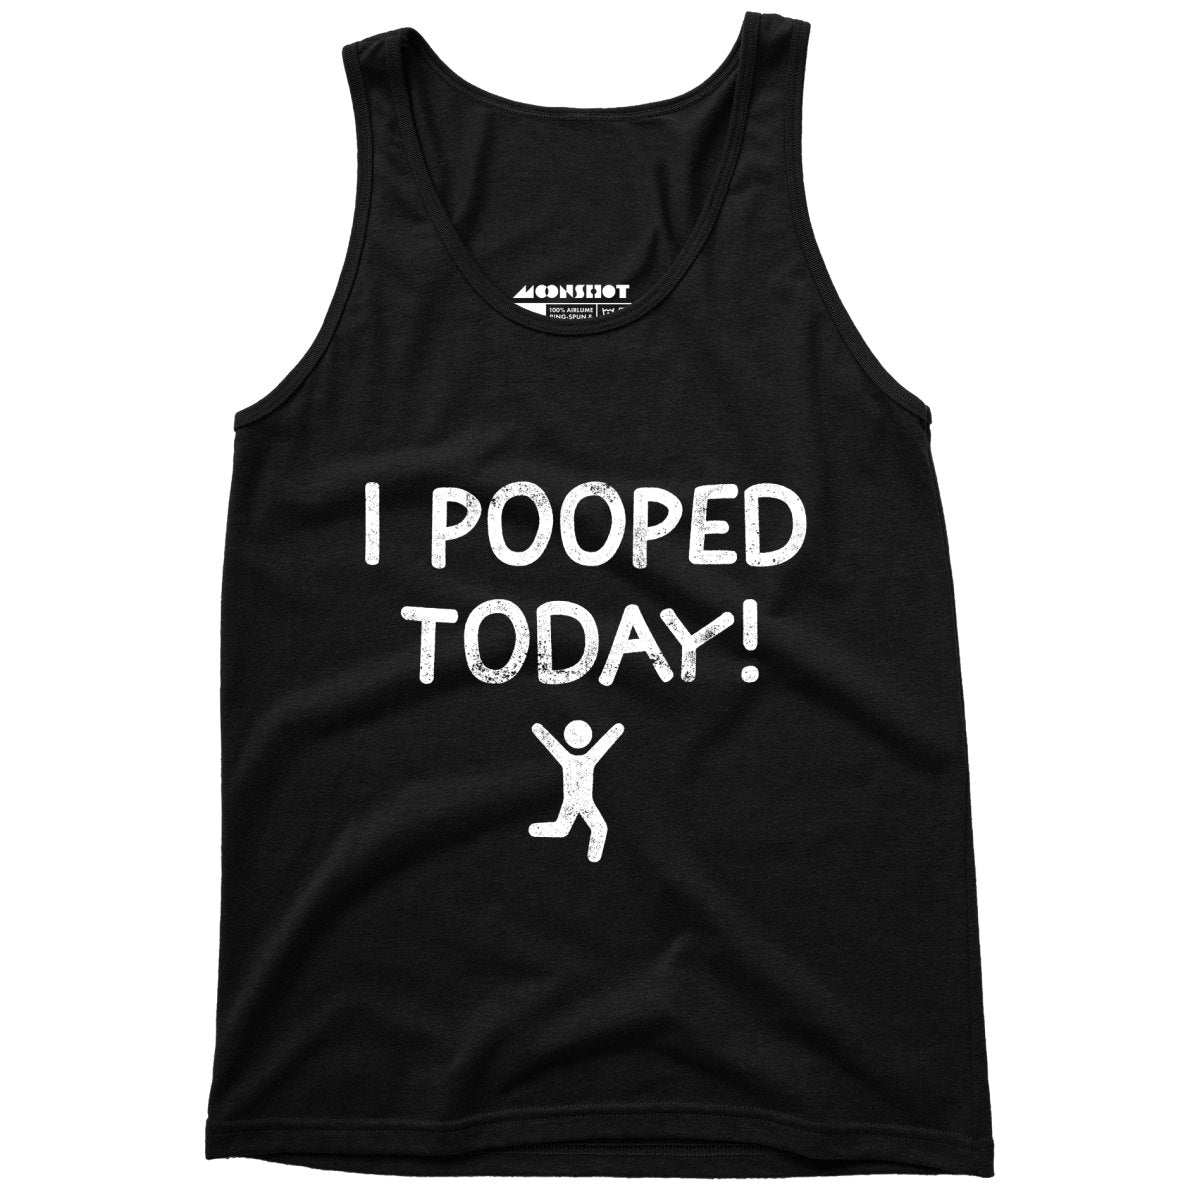 I Pooped Today! - Unisex Tank Top